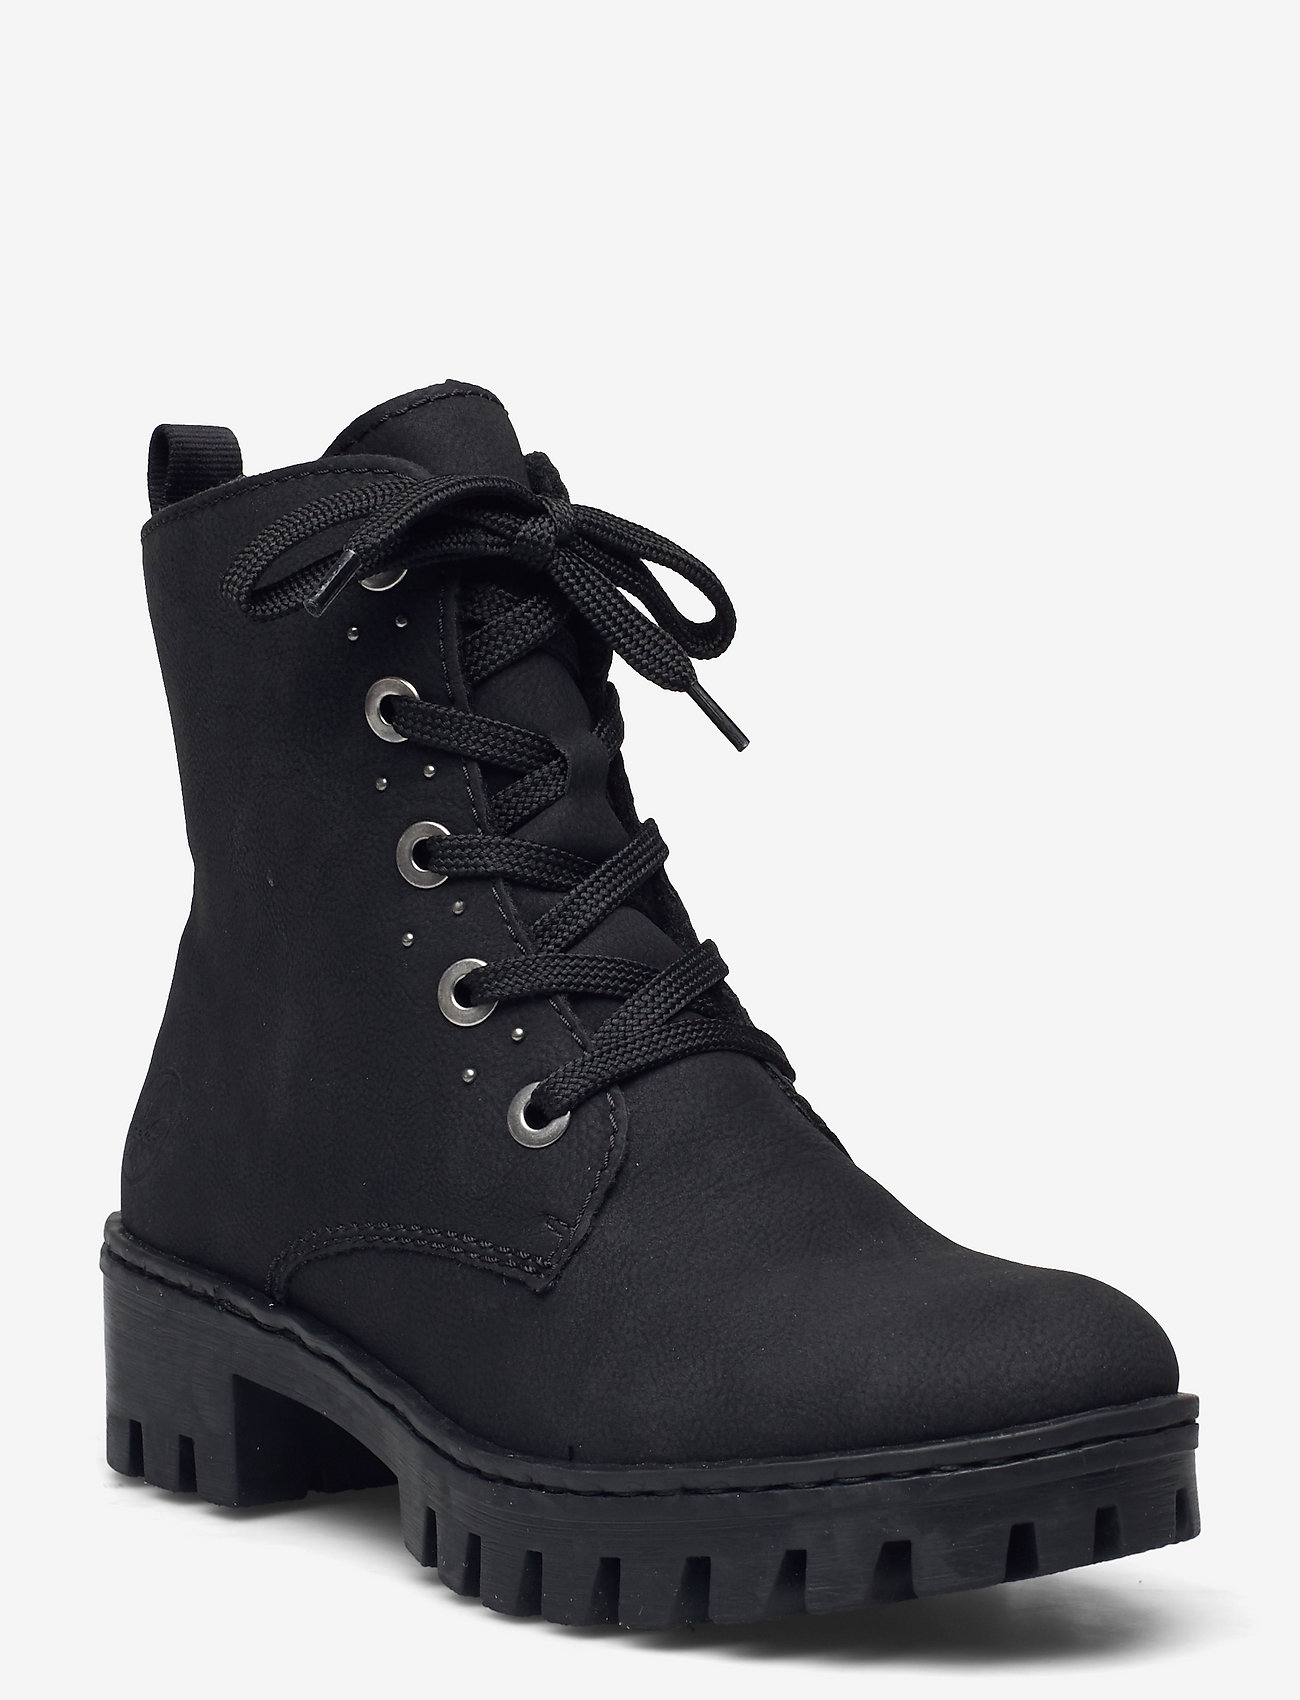 Rieker - 75700-01 - laced boots - black - 0